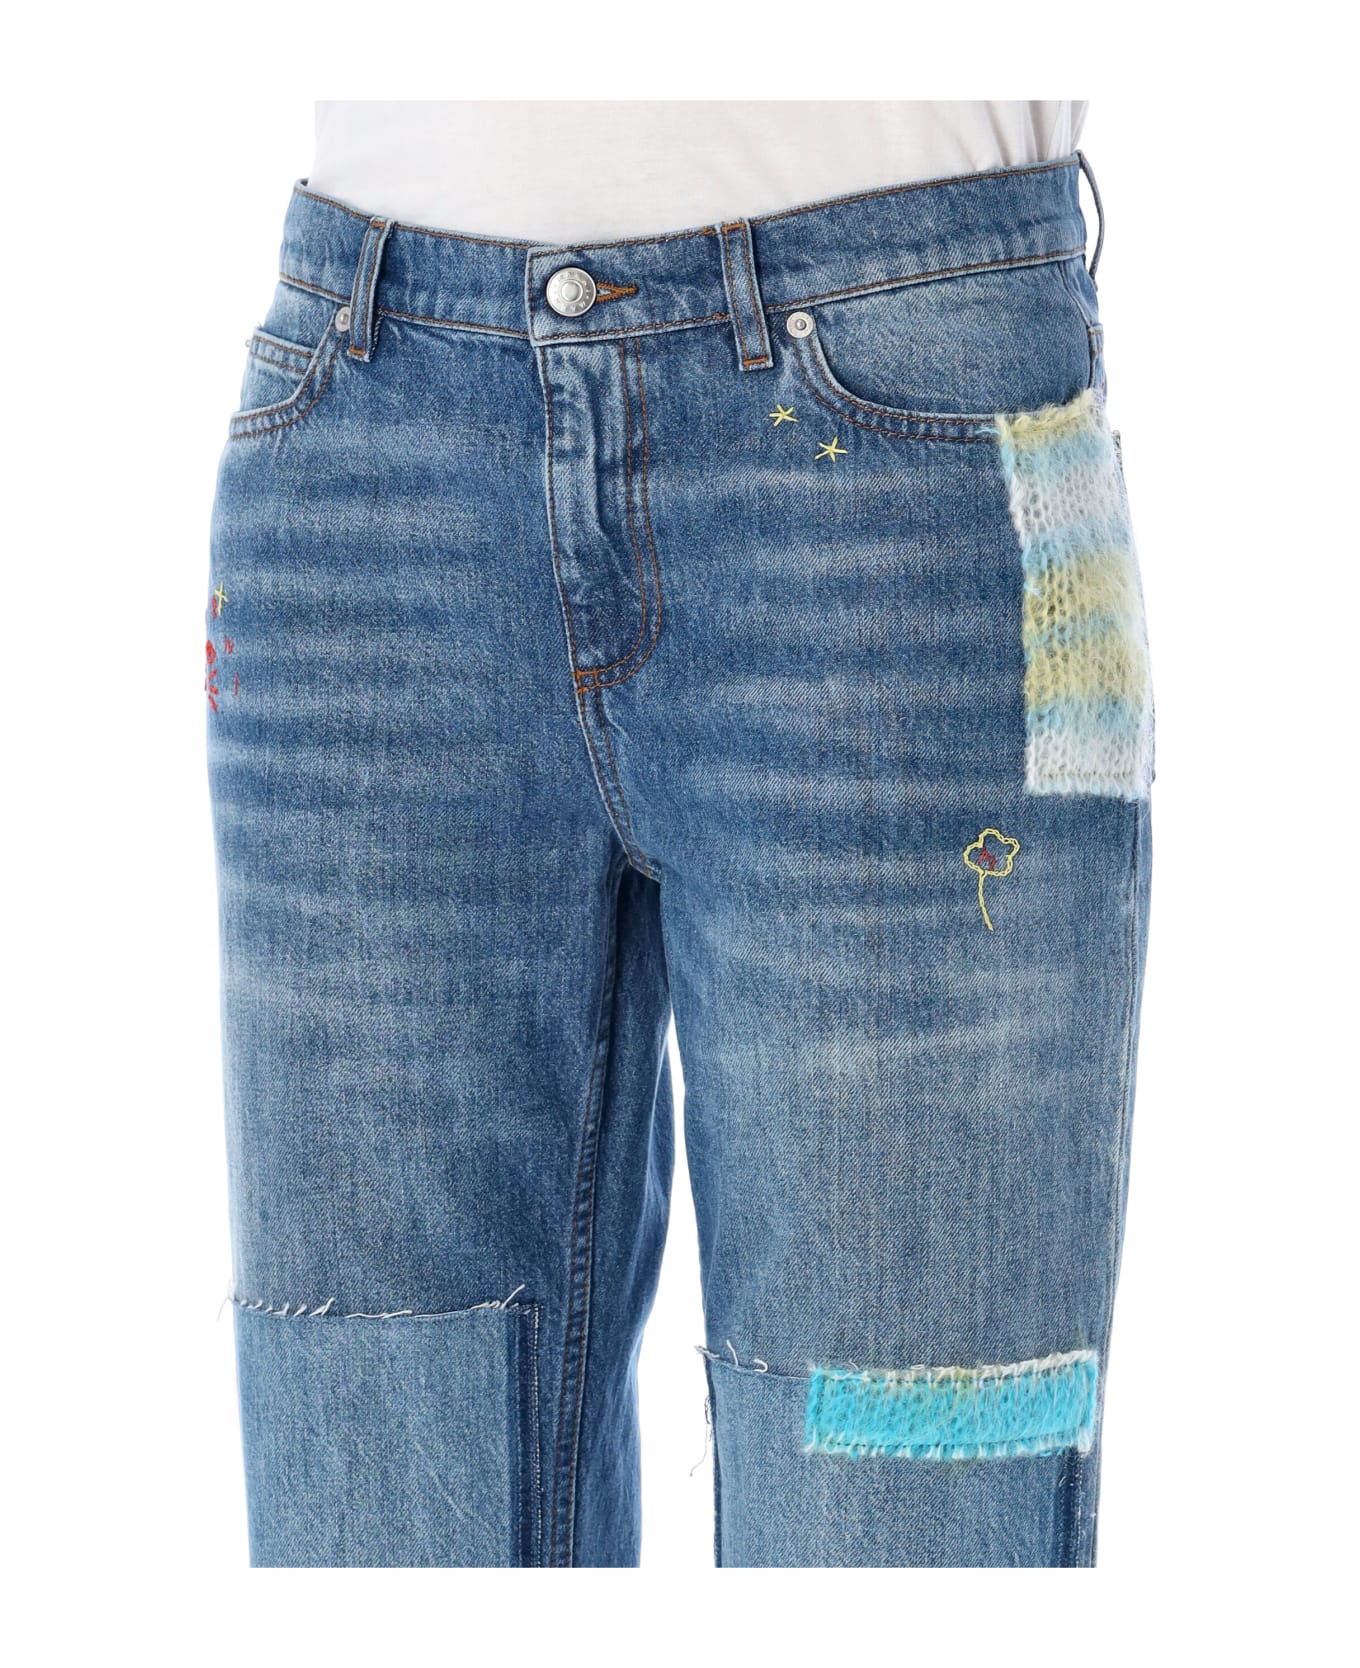 Marni Mohair Patches Jeans - BLUE MIX